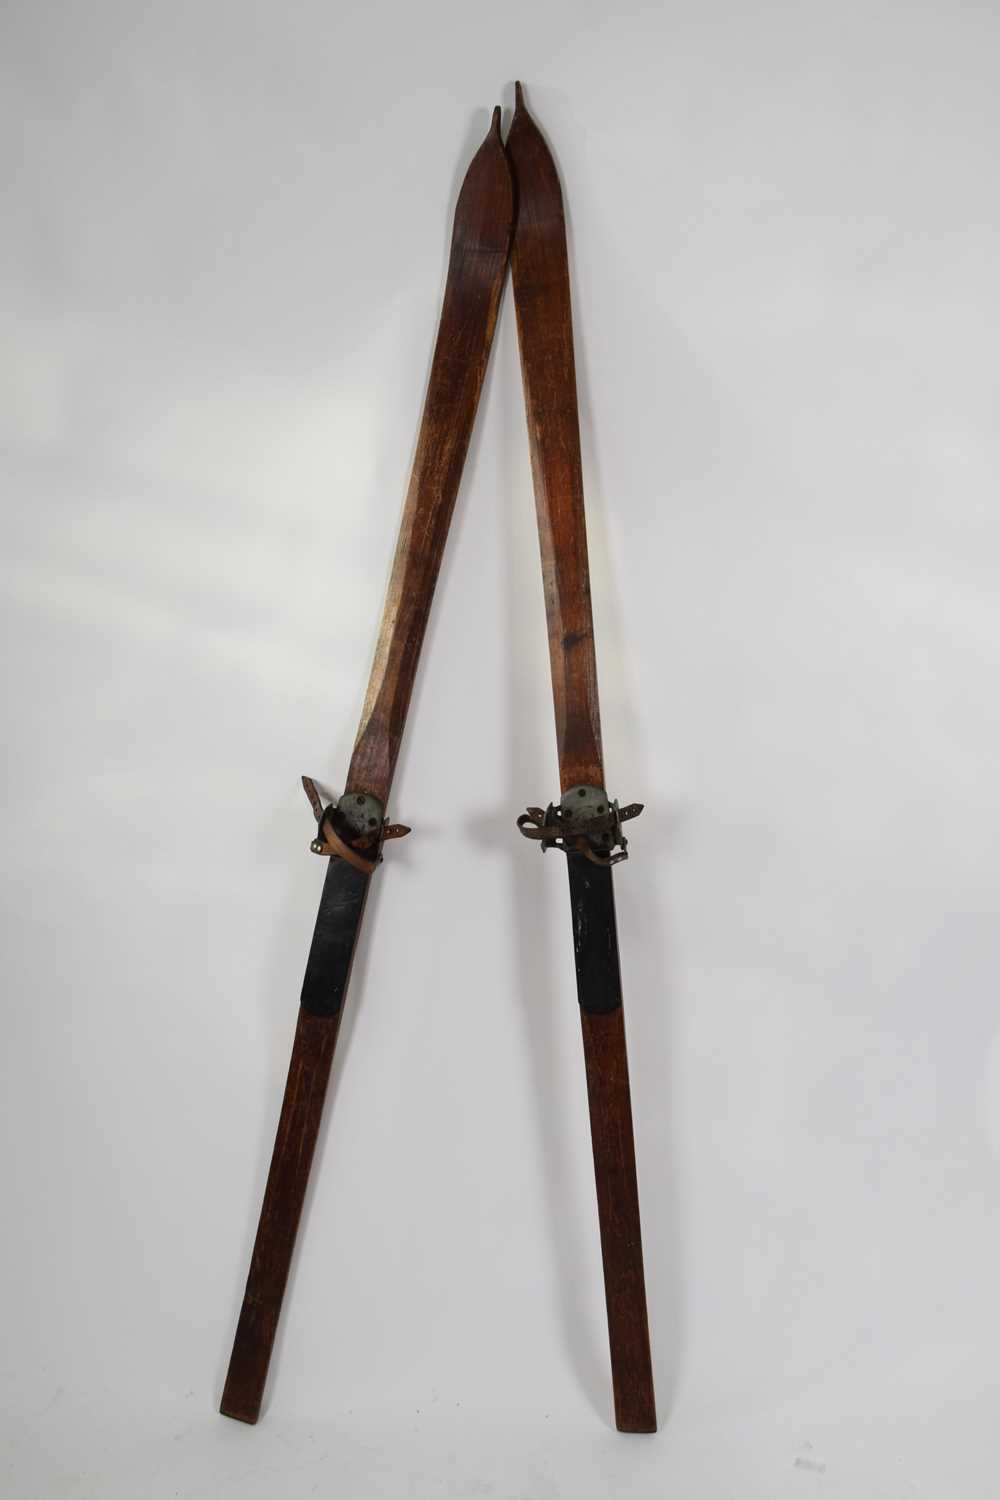 Lot 184 - Pair of vintage wooden skis made by Luck